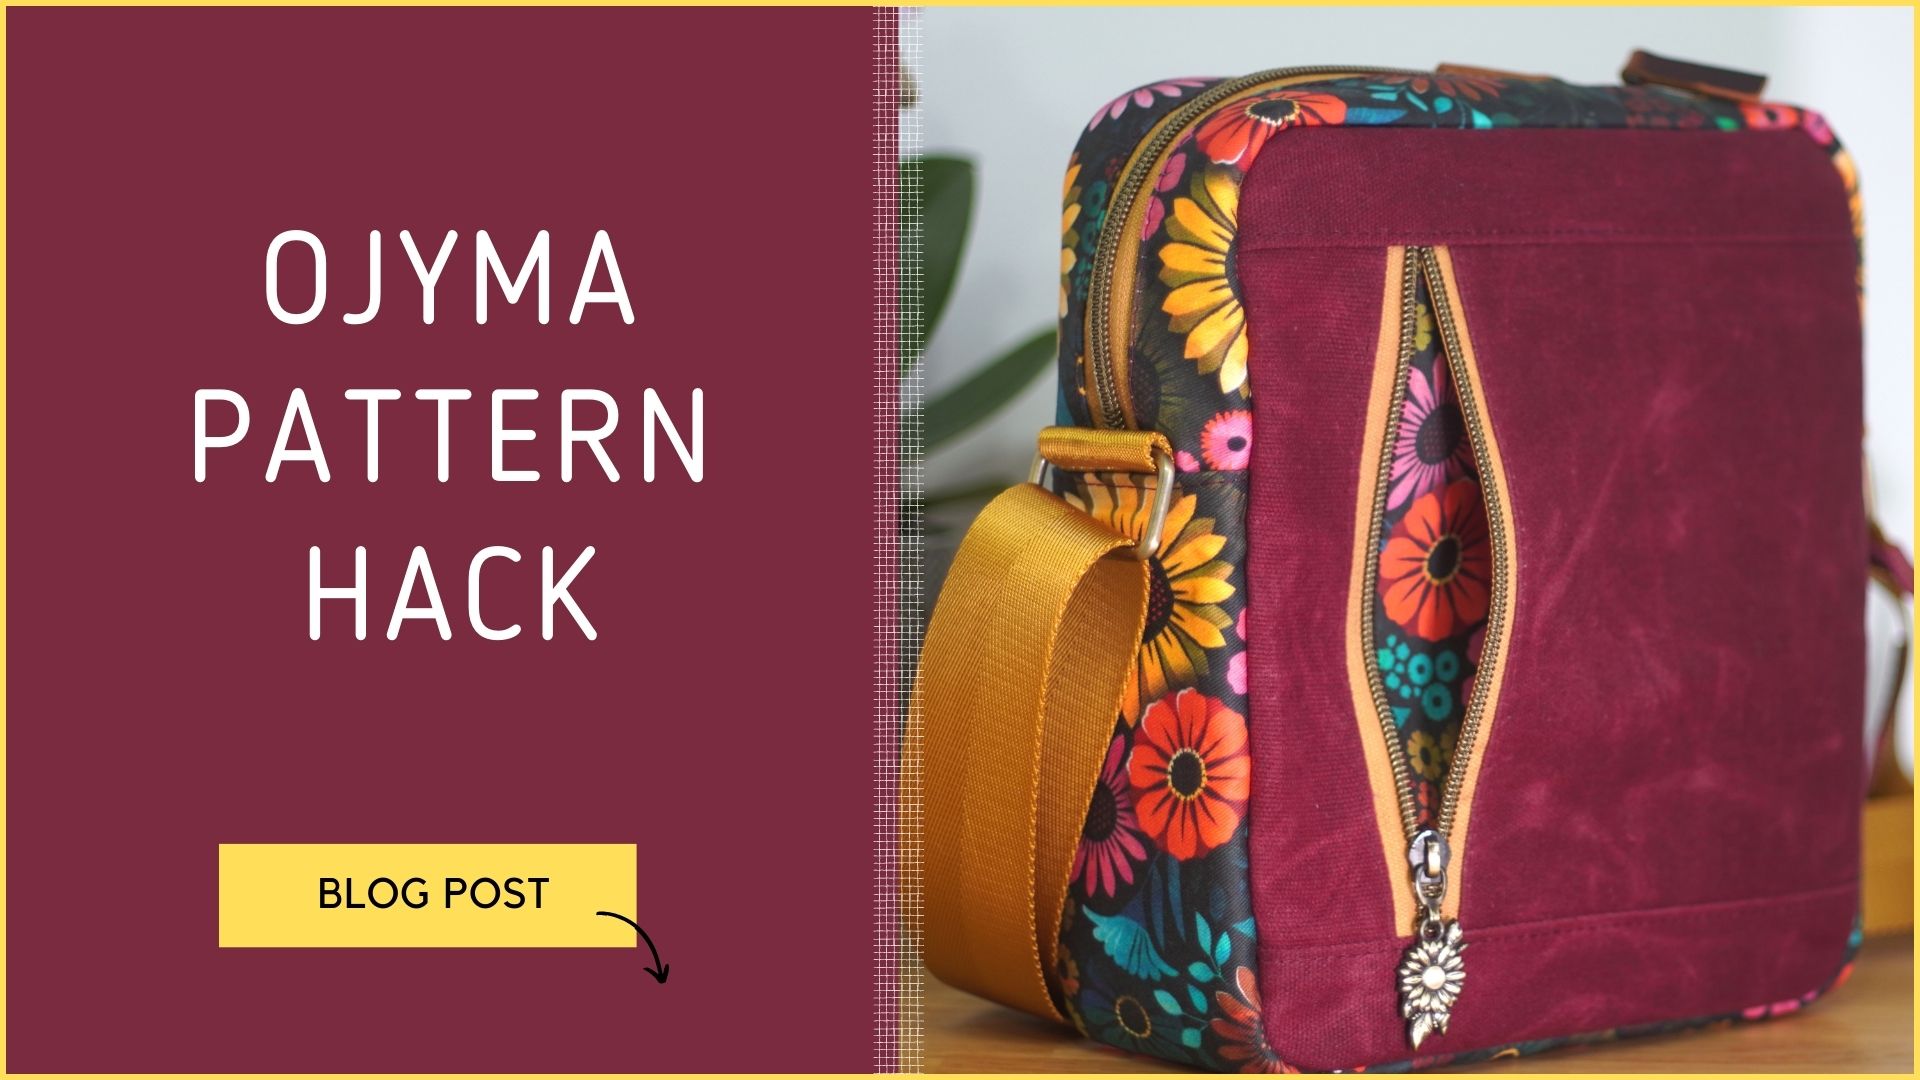 Ojyma Pattern Hack Blog Post by Country Cow Designs